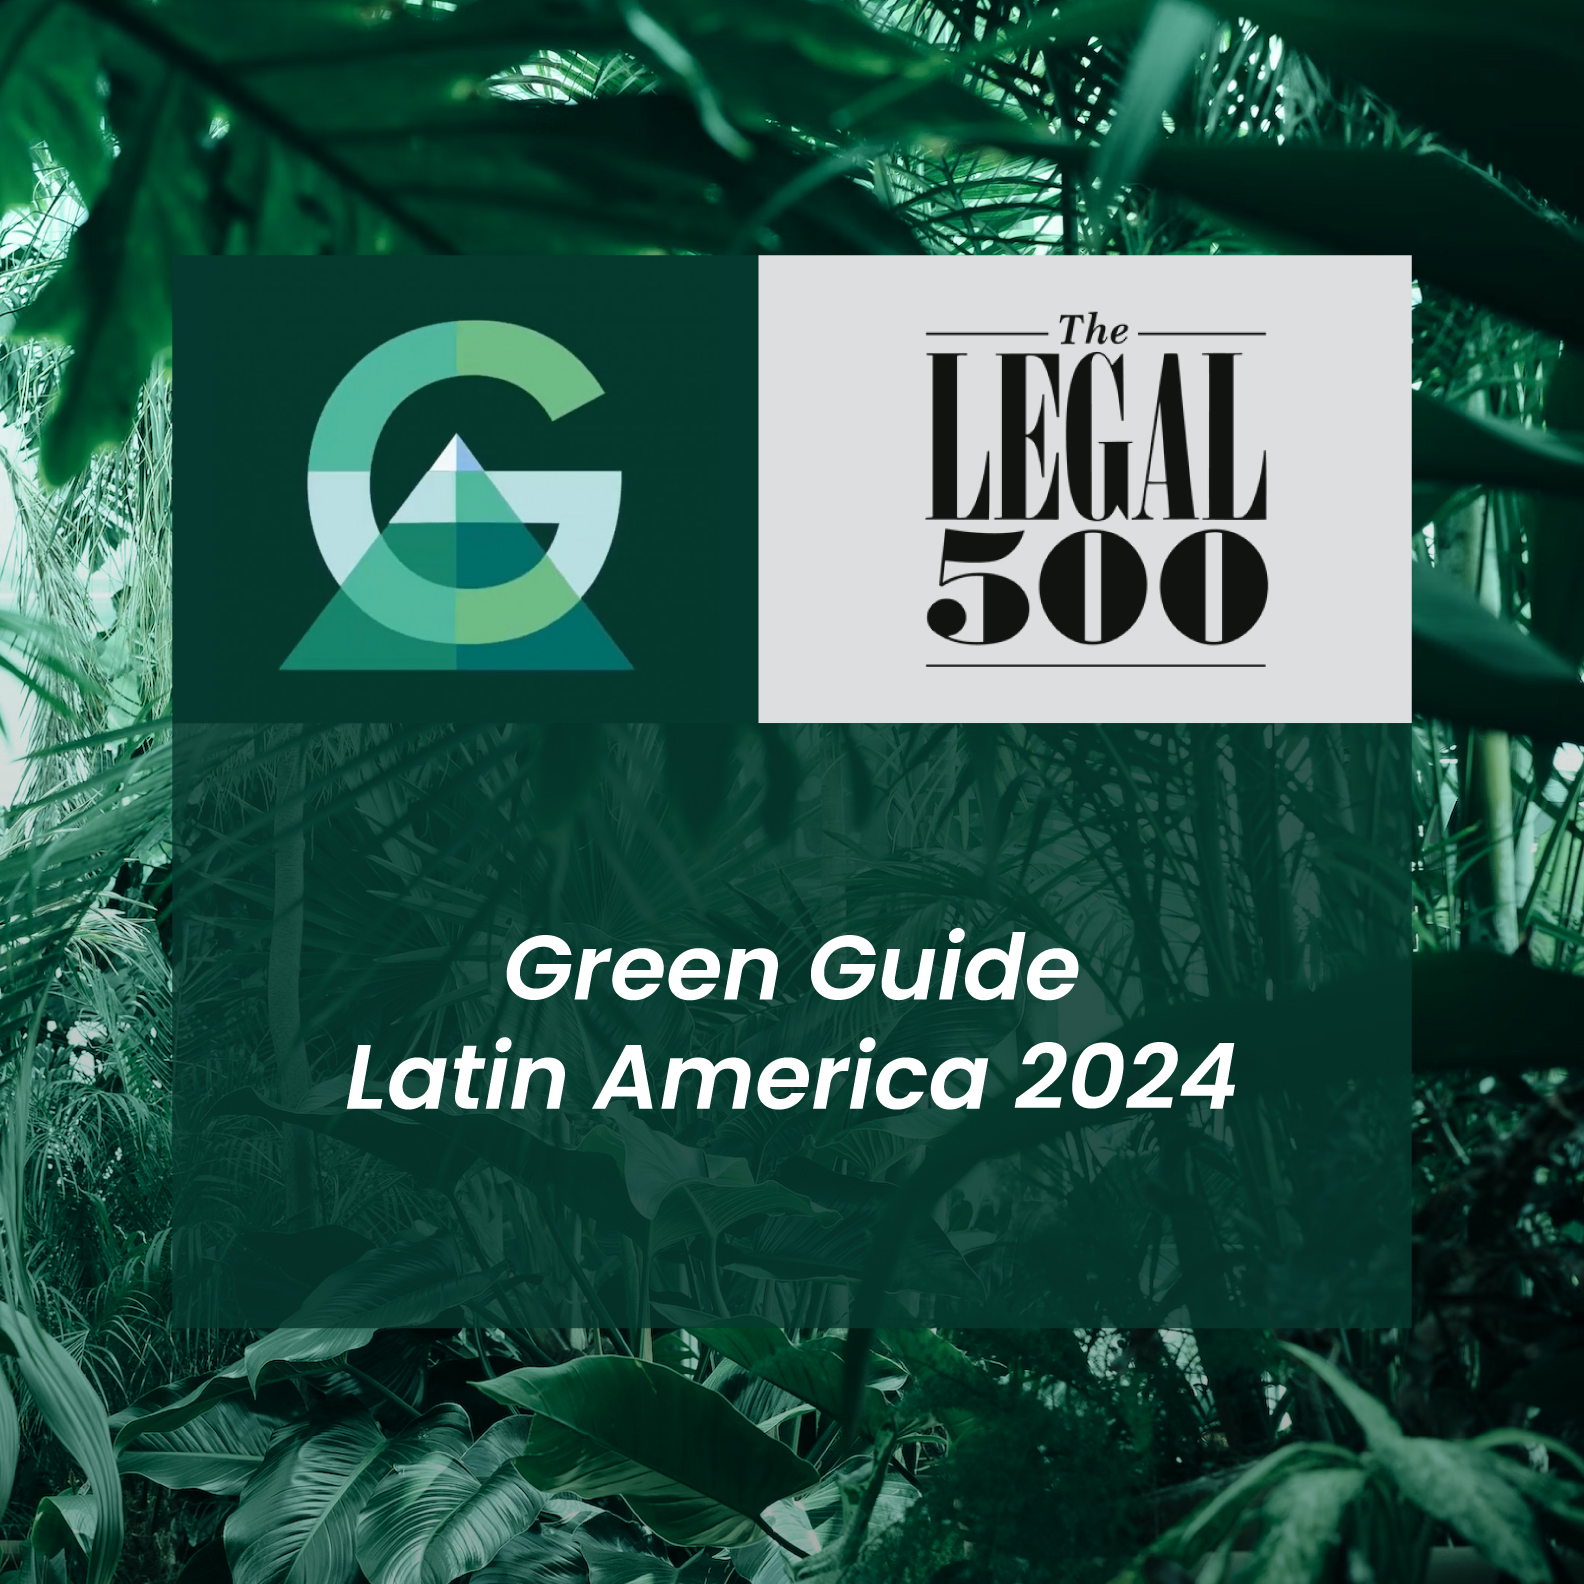 Bruchou & Funes de Rioja - Recommended Firm by The Legal 500 Green Guide Latin America 2024 edition